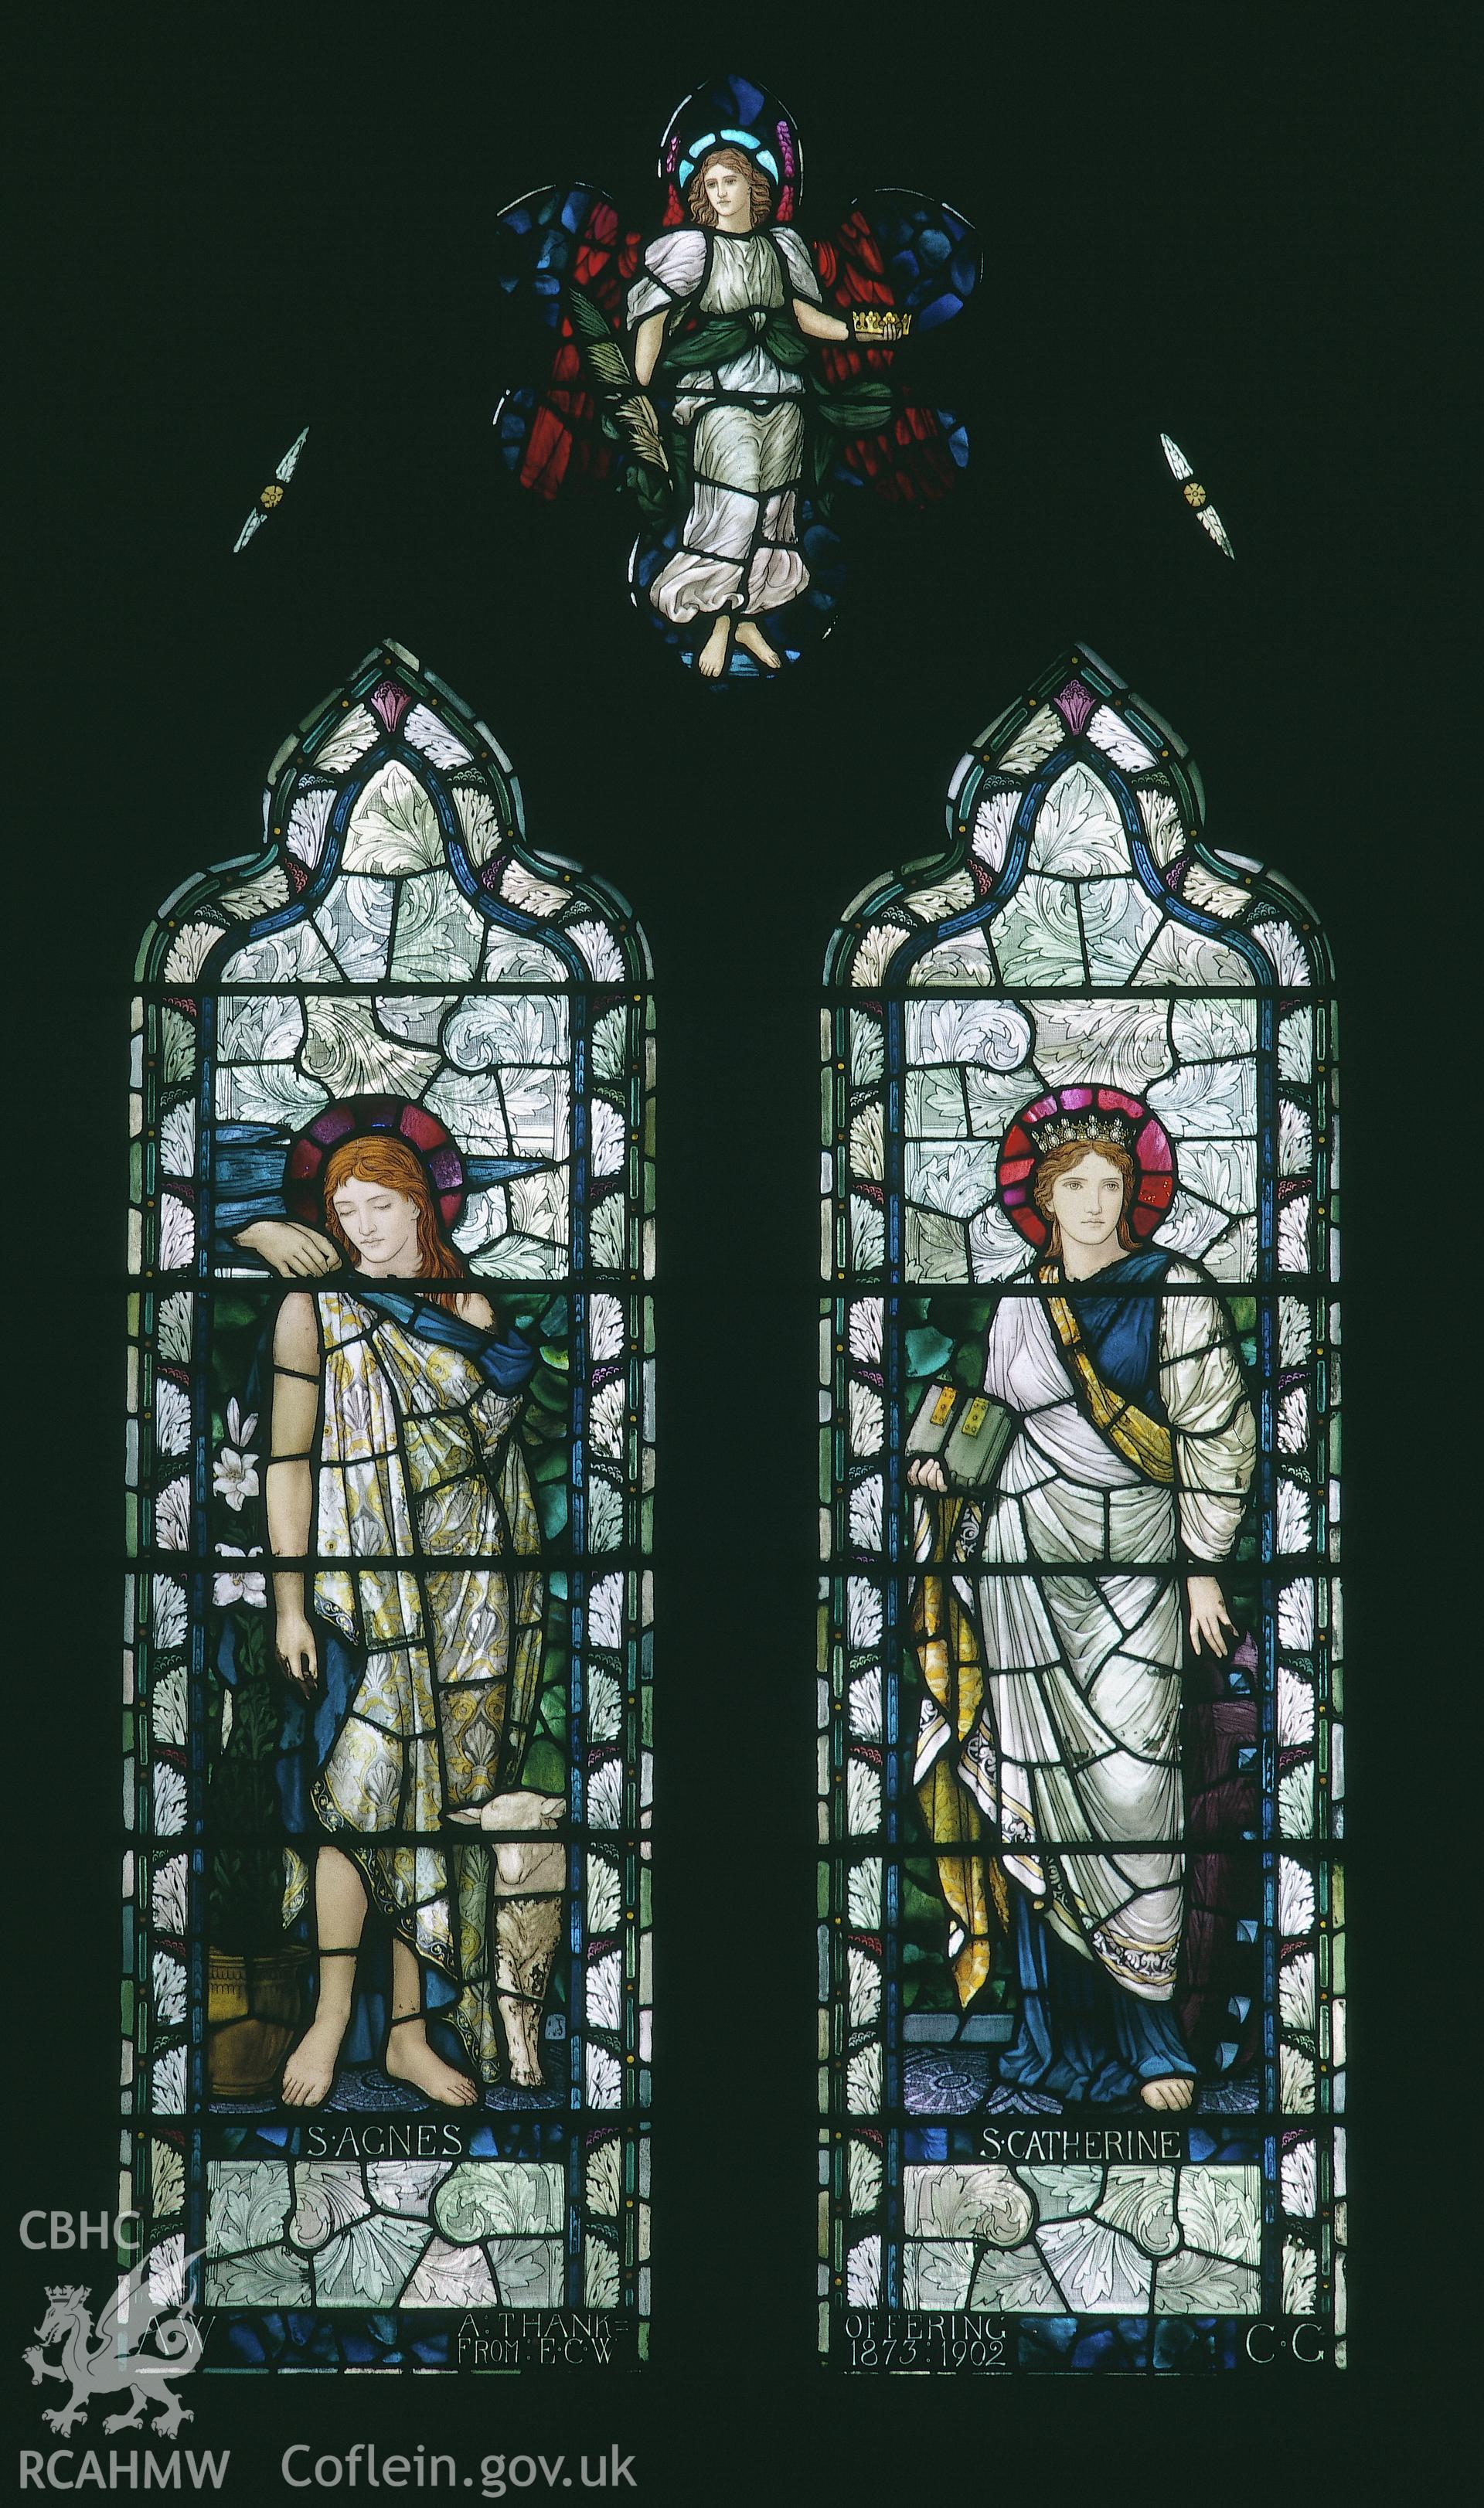 RCAHMW colour transparency of an iInterior view of a stained glass window at Hawarden Church designed by Edward Burne-Jones, depicting Saint Agnes and Saint Catherine.